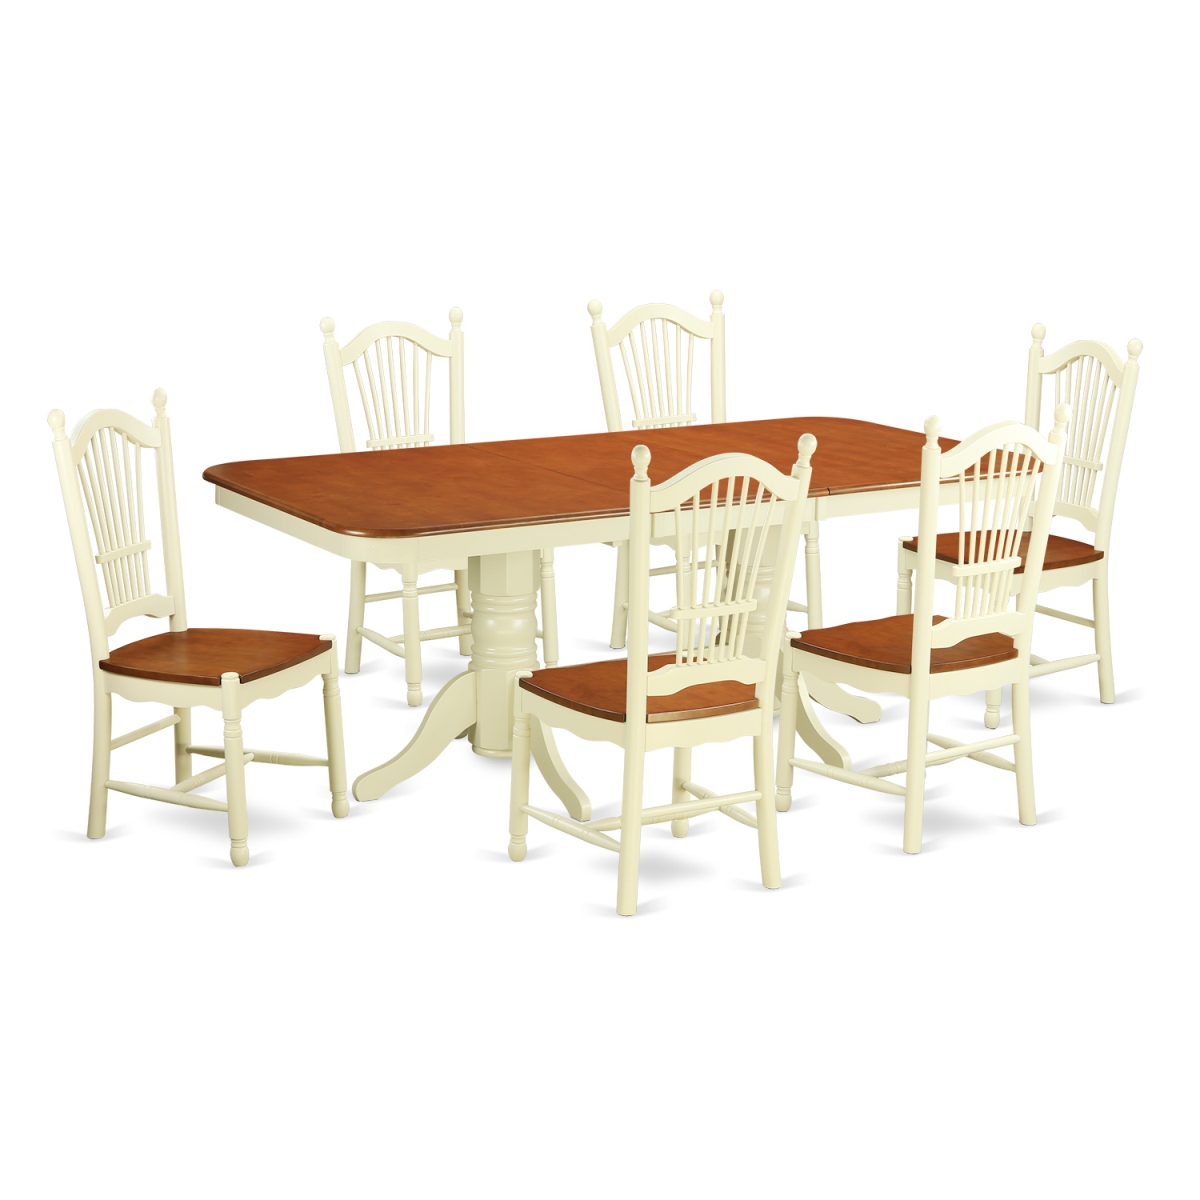 NADO7-WHI-W Dining Table Set - Kitchen Table & 6 Chairs, Buttermilk & Cherry - 7 Piece -  East West Furniture